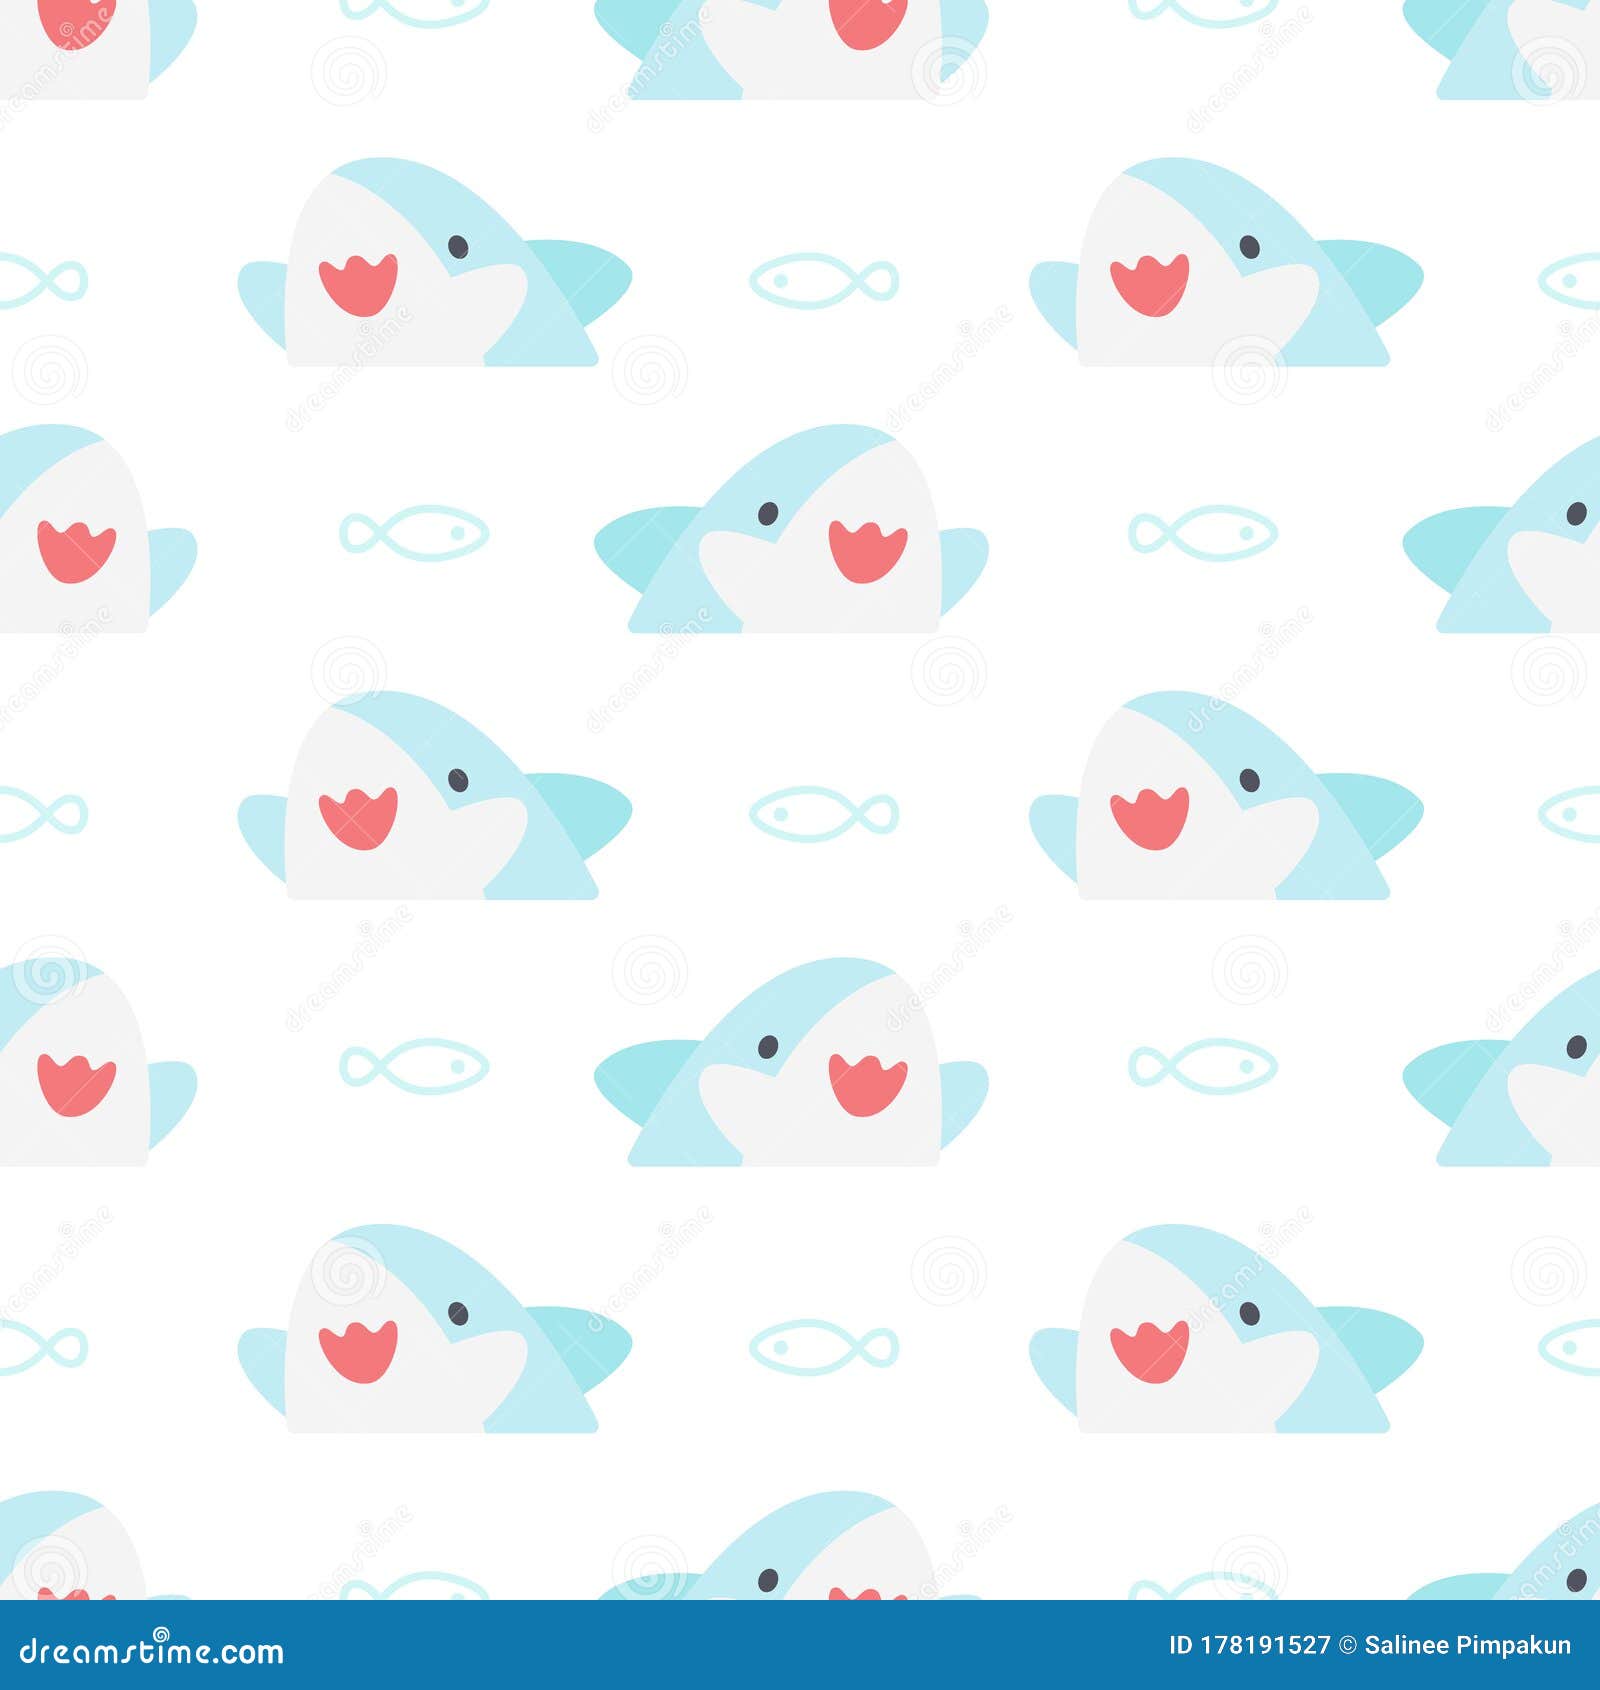 Shark Wallpaper Images  Free Photos PNG Stickers Wallpapers  Backgrounds   rawpixel